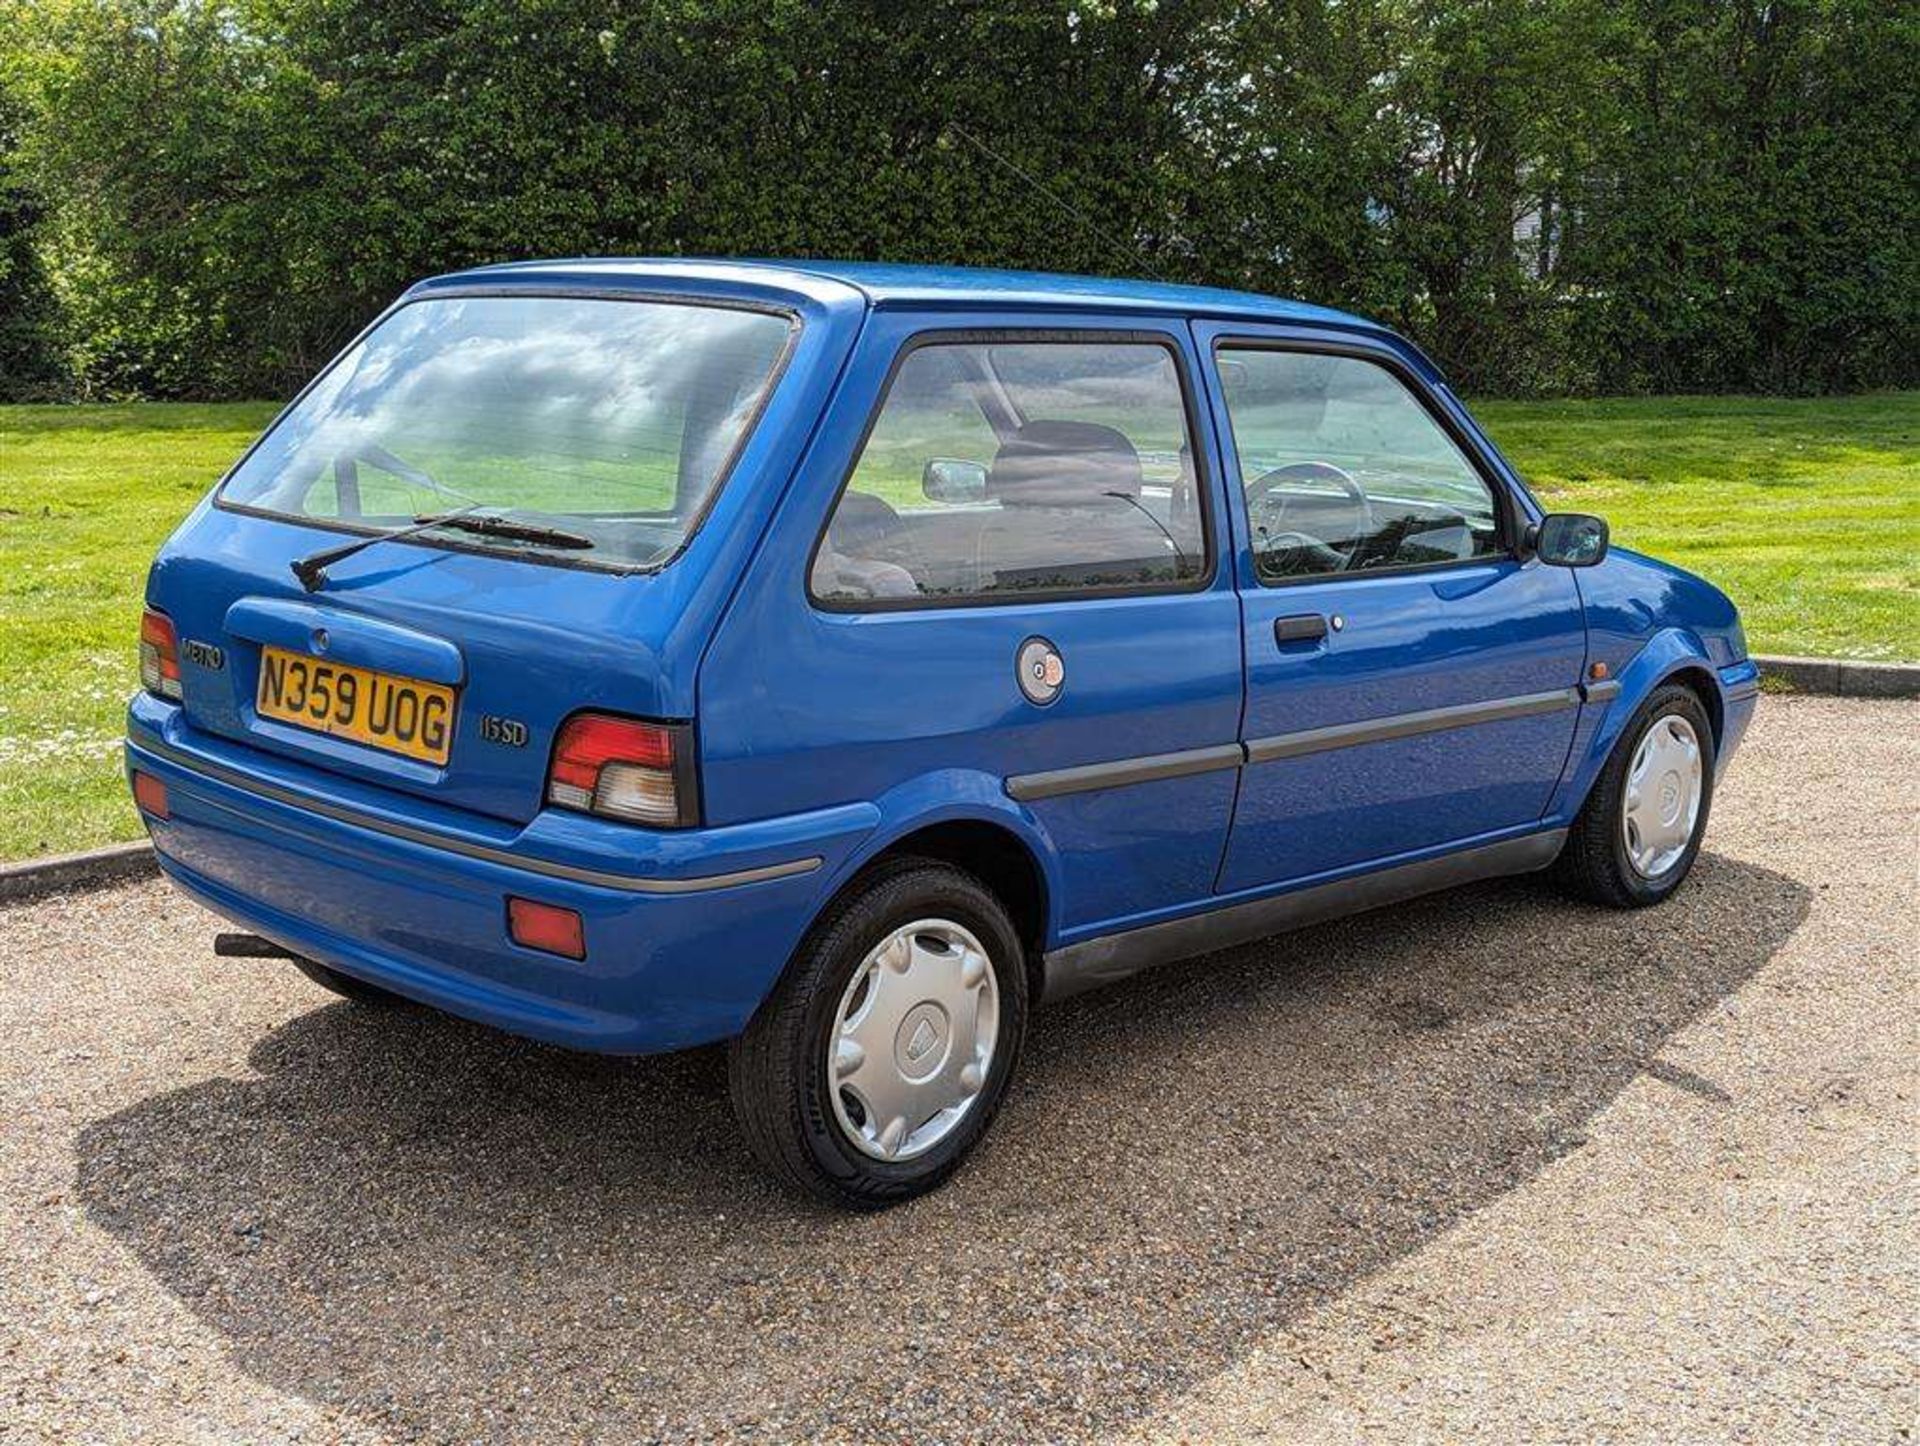 1995 ROVER 115 SD - Image 8 of 30